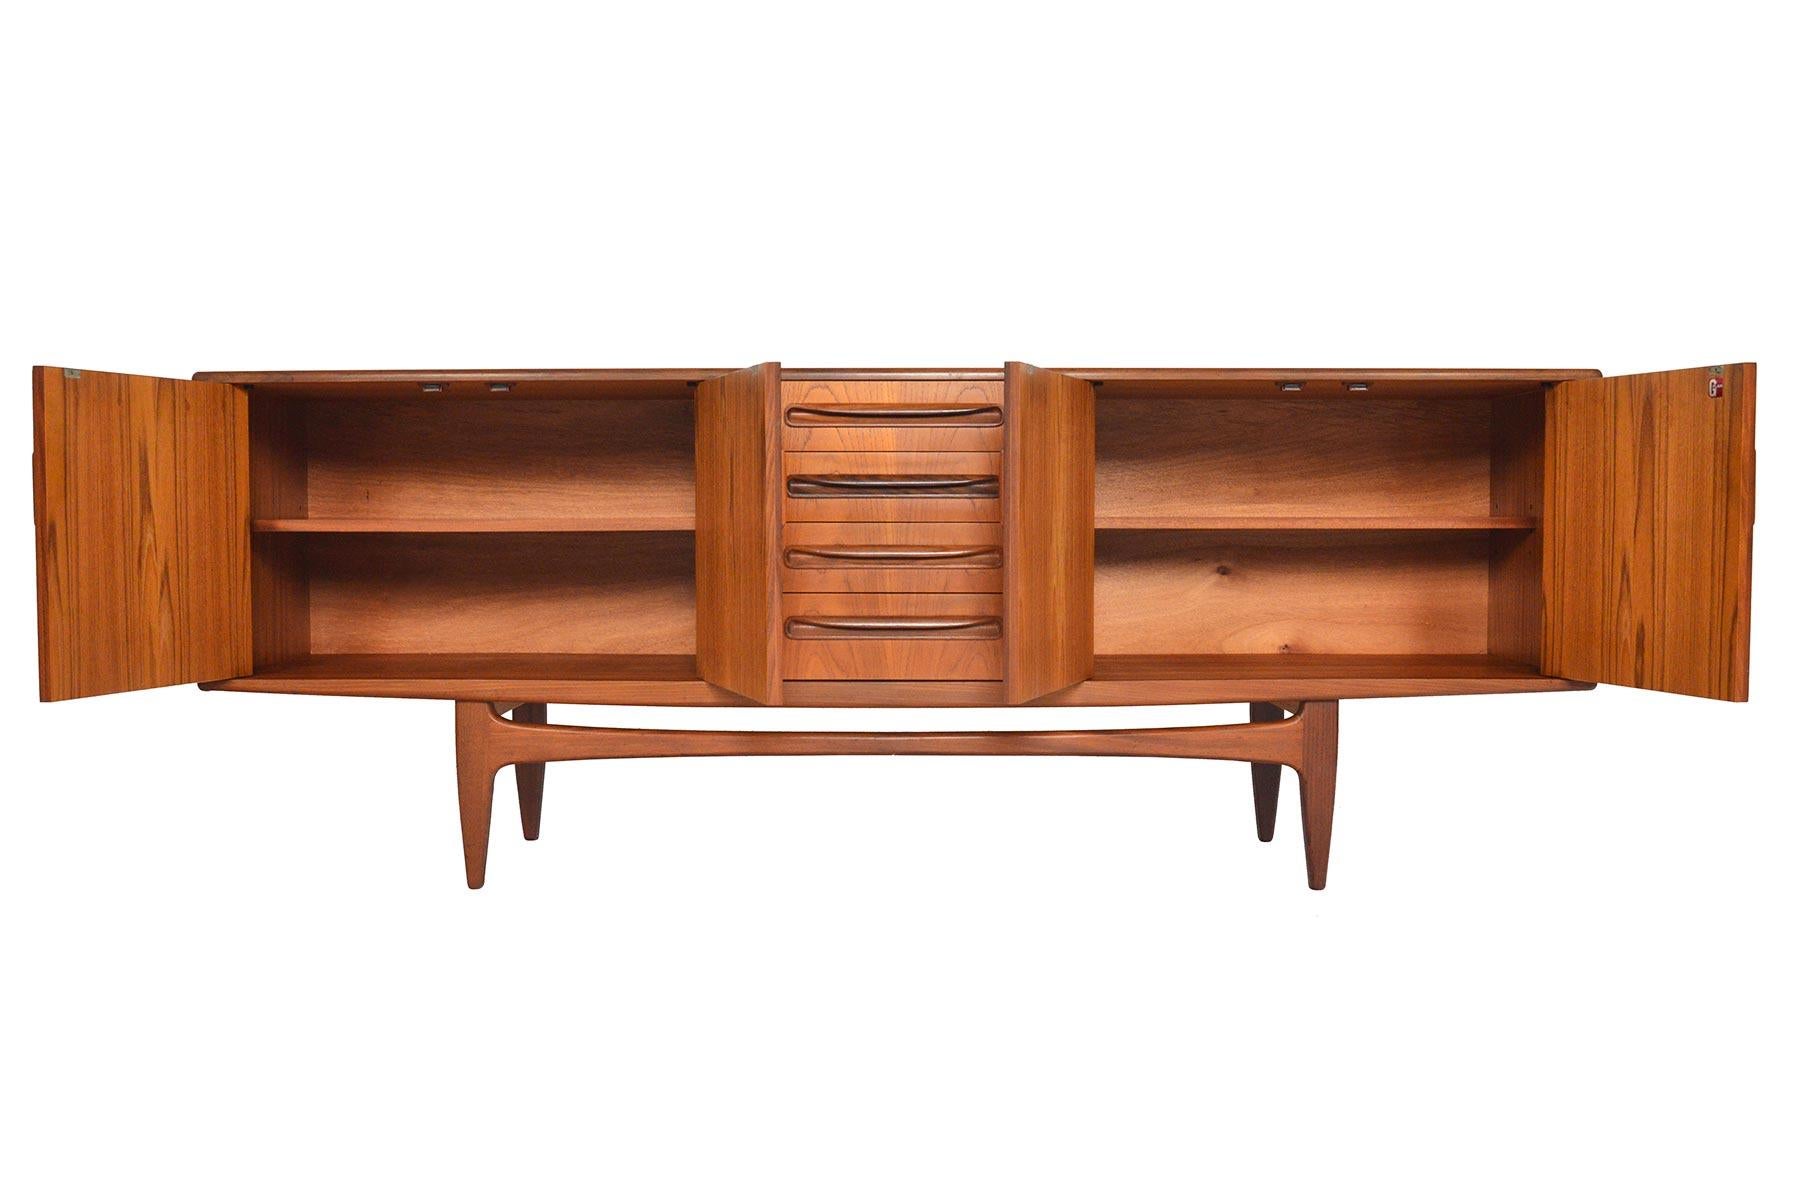 This large Mid-Century Modern G Plan Fresco teak credenza was designed by Victor Wilkins in the 1960s. Beautiful afromosia pulls adorn the drawers and doors of this piece. Left and right doors open to reveal adjustable shelving. Case floats upon a